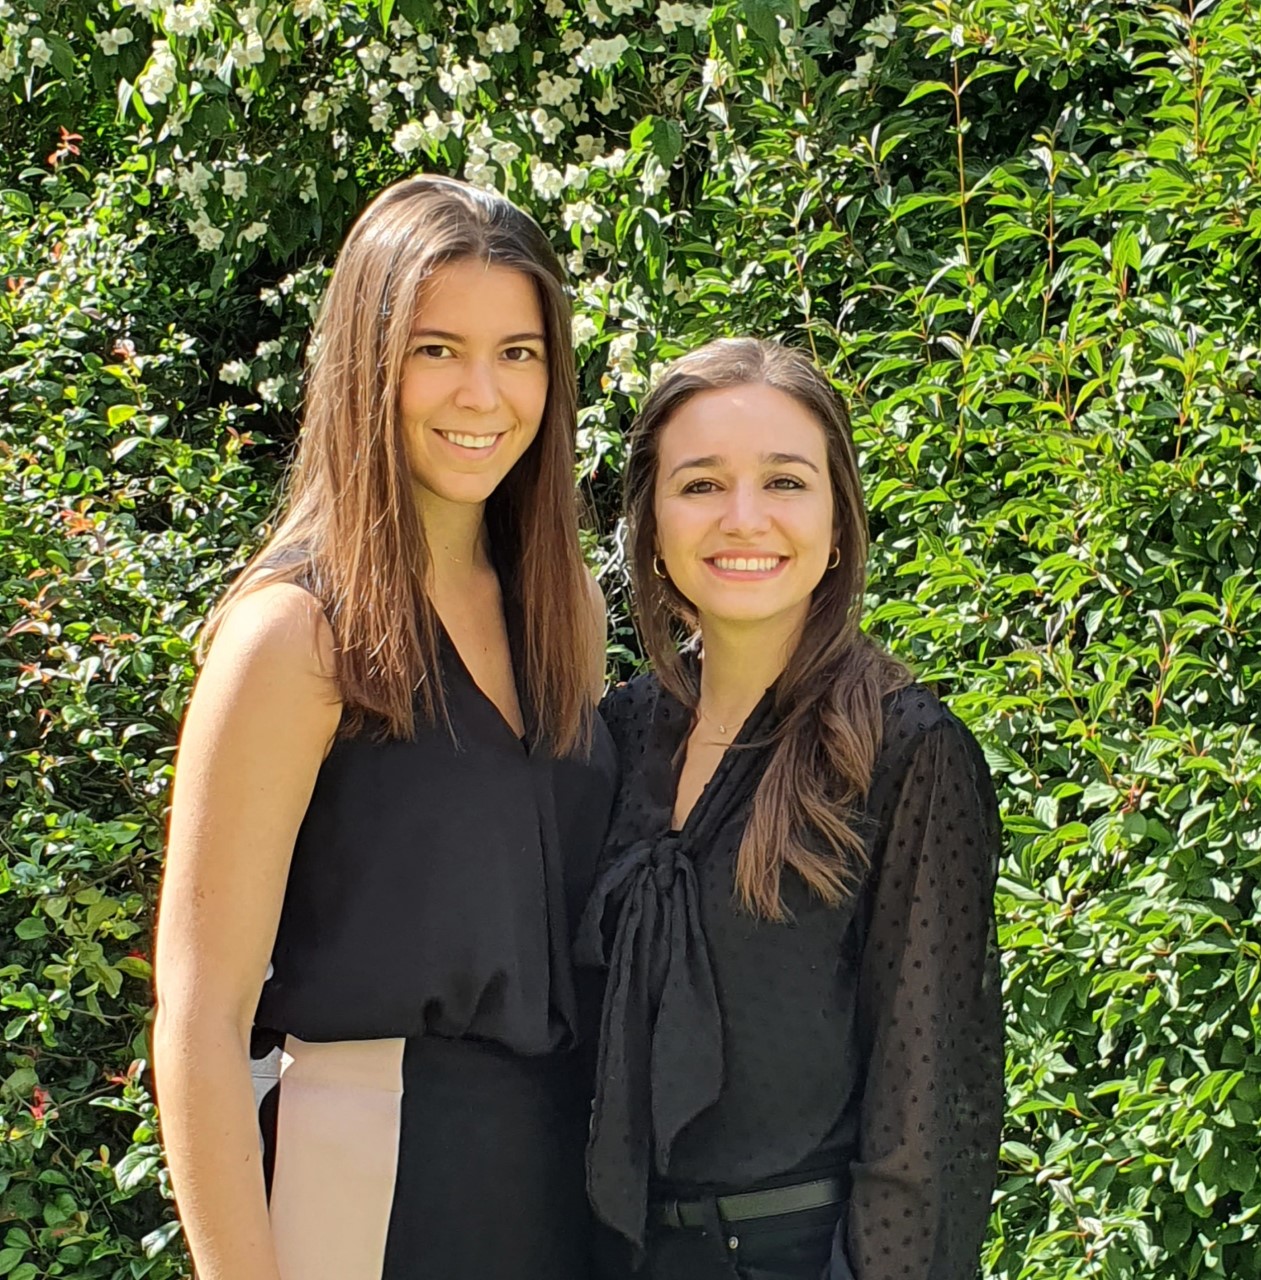 Meet the two MBA students helping combat COVID-19 in care homes ...